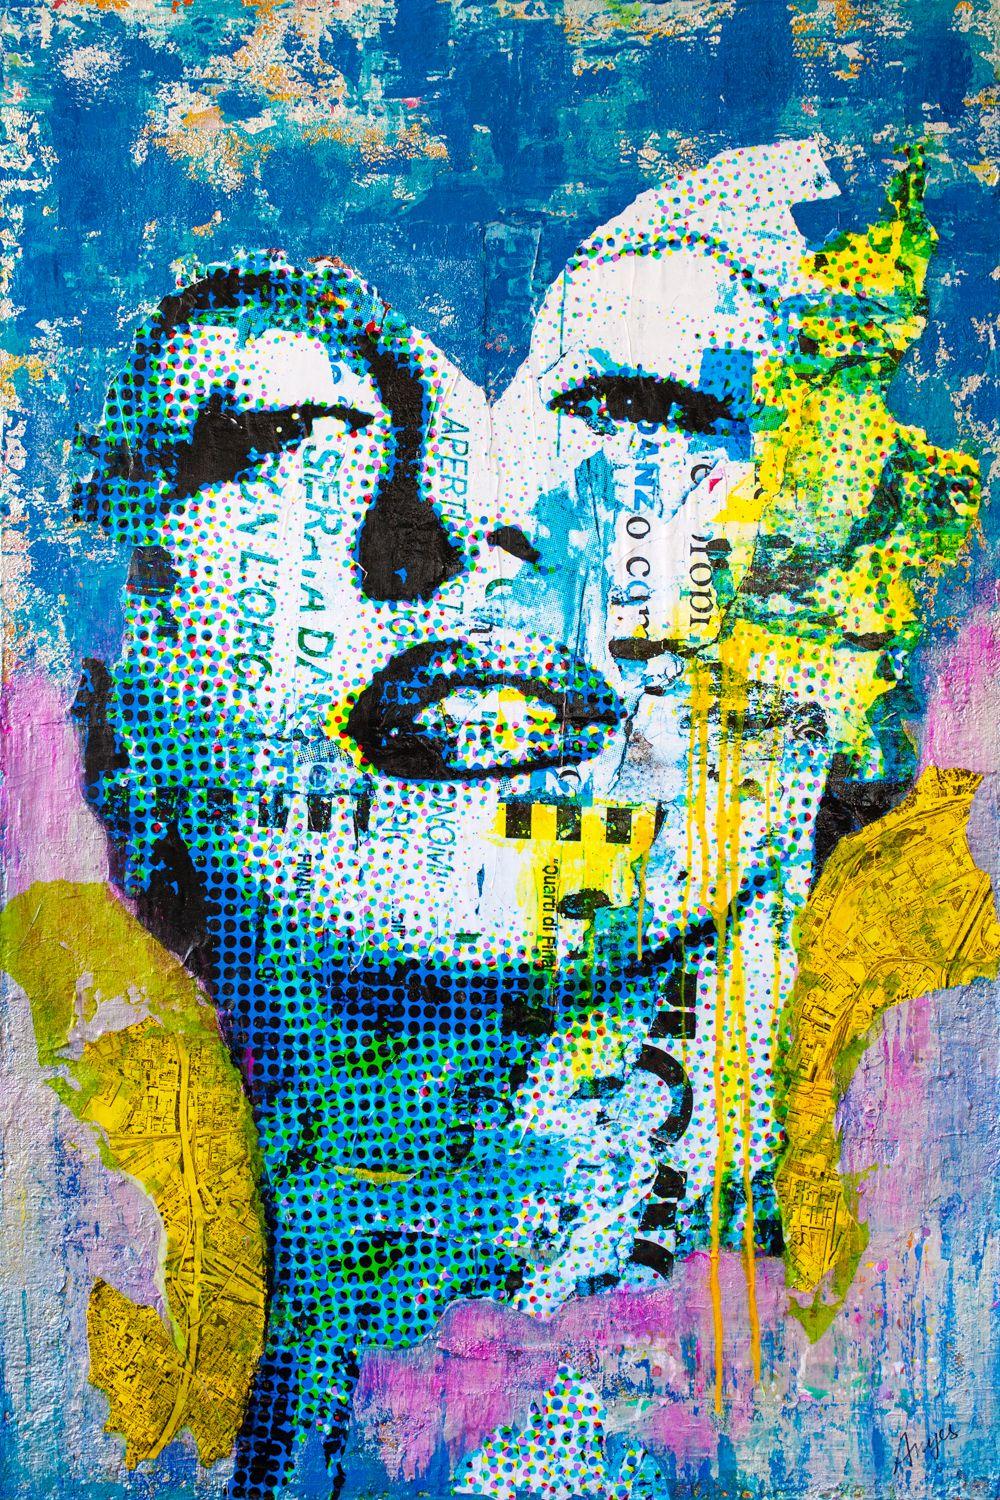 Mixed media painting made by collaging prints of an image of marilyn monroe i created by combining a found photo with graphic elements. The painting background used to be an abstract painting I was no longer happy with. In addition to the prints of